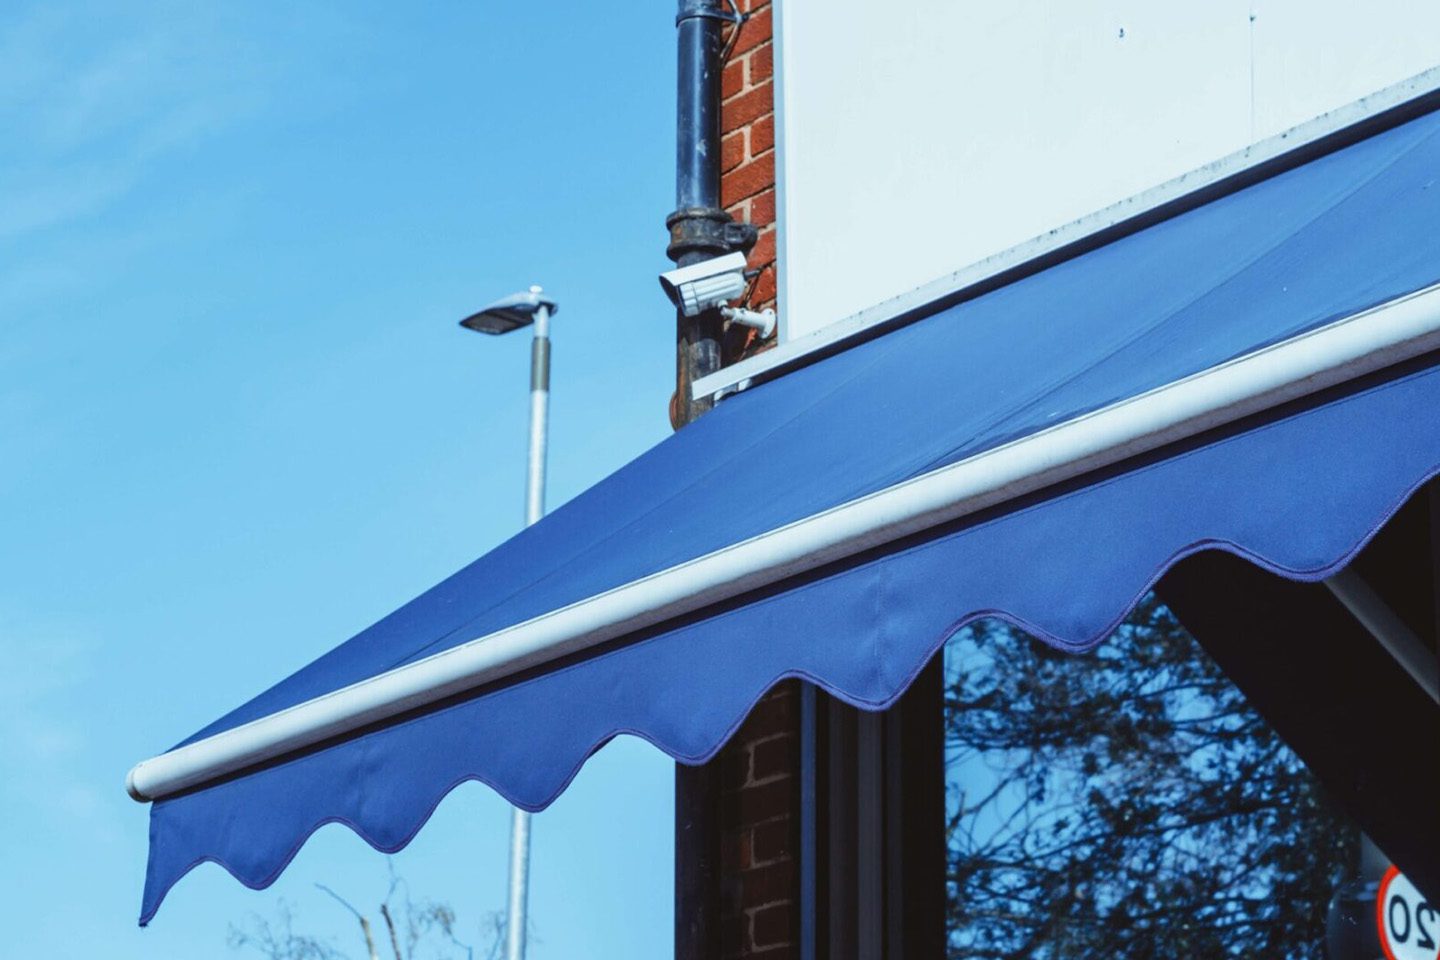 A blue awning is shown on the side of a building.